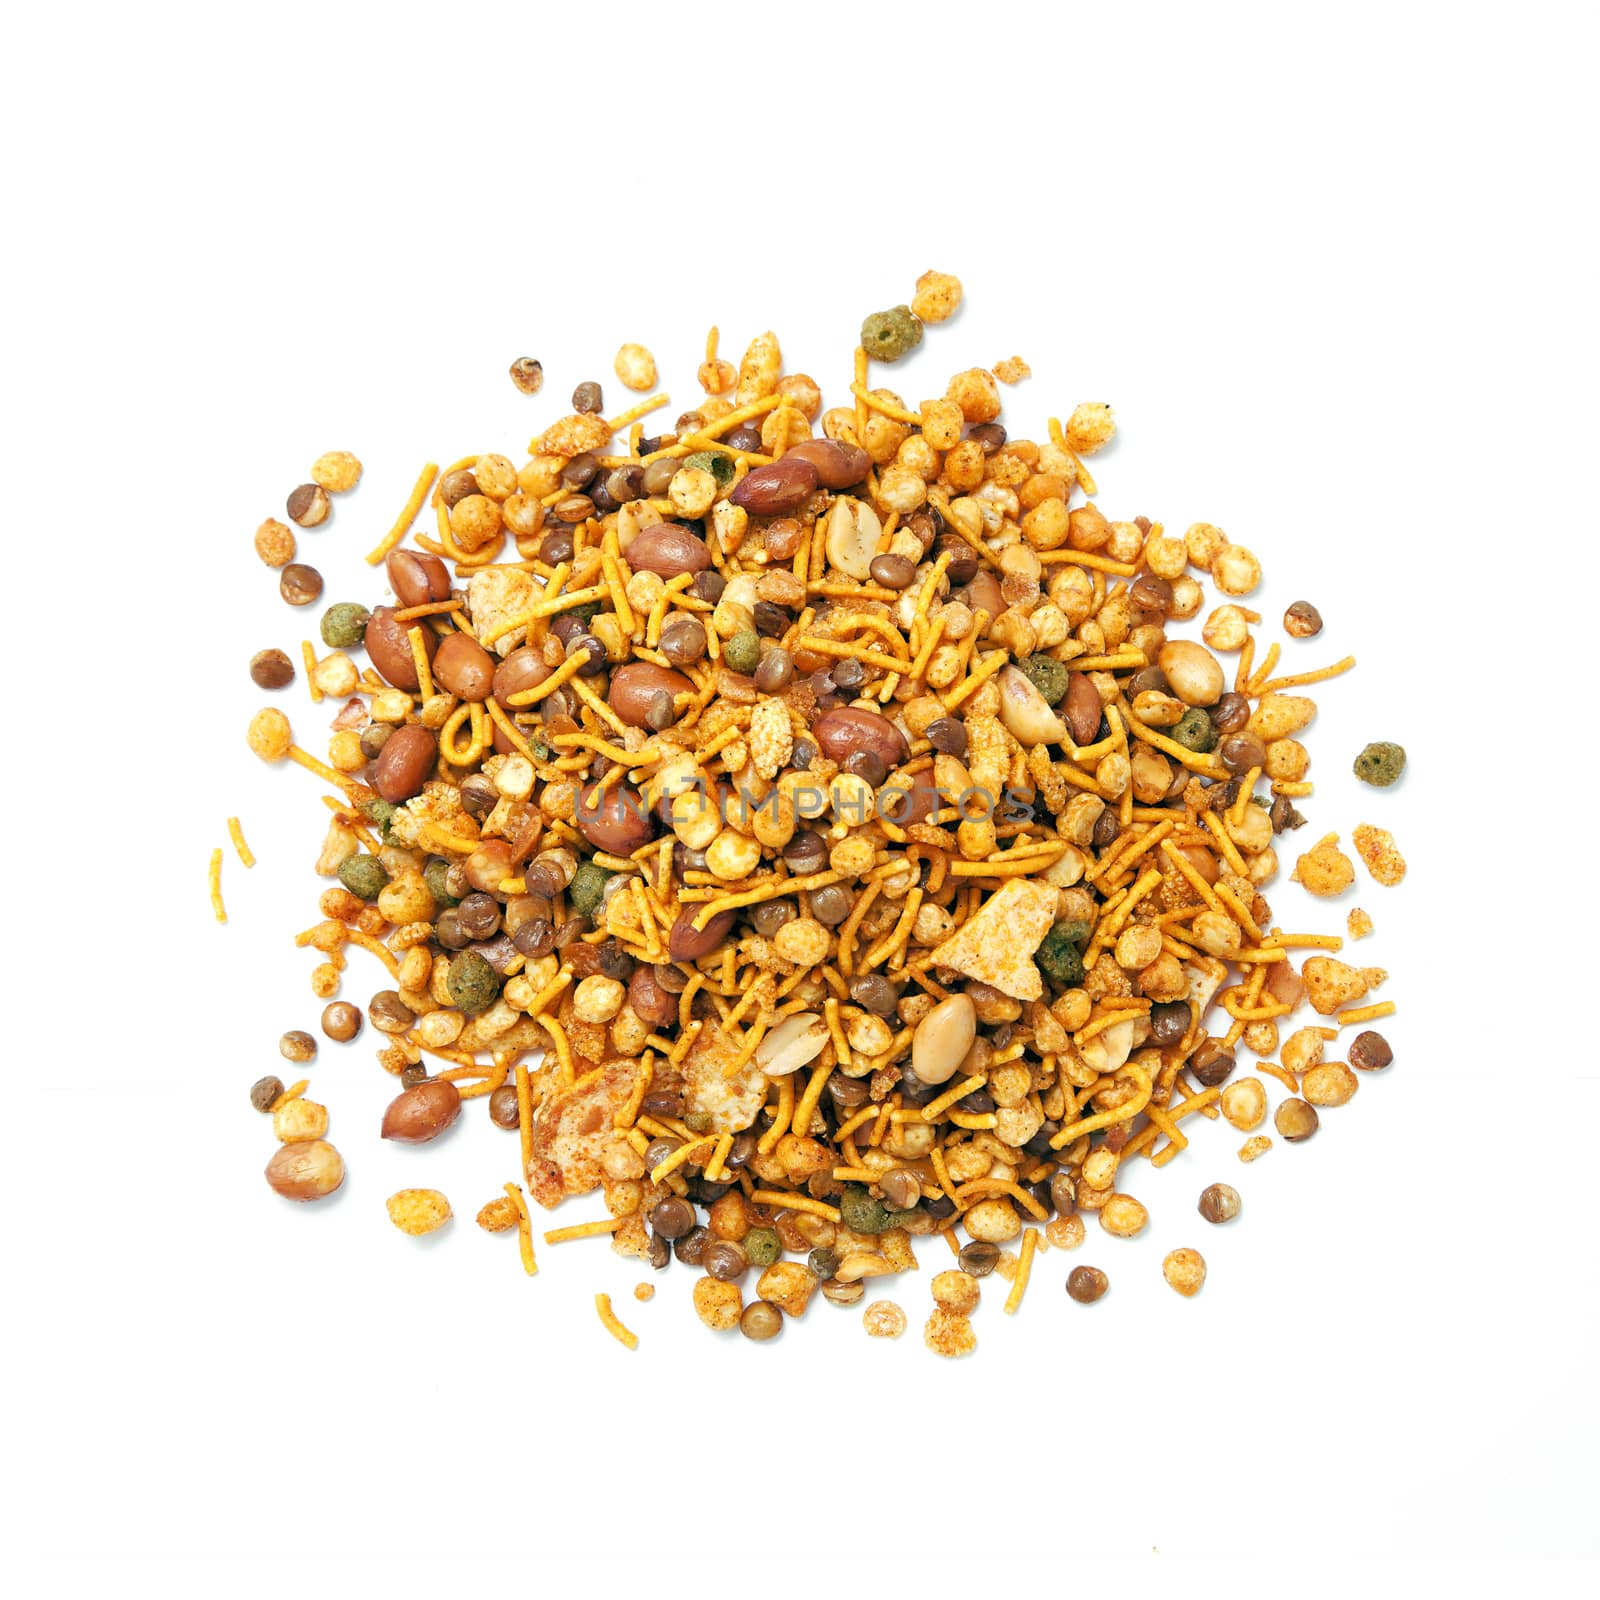 Pile of dry roasted Indian snack mix, isolated over white